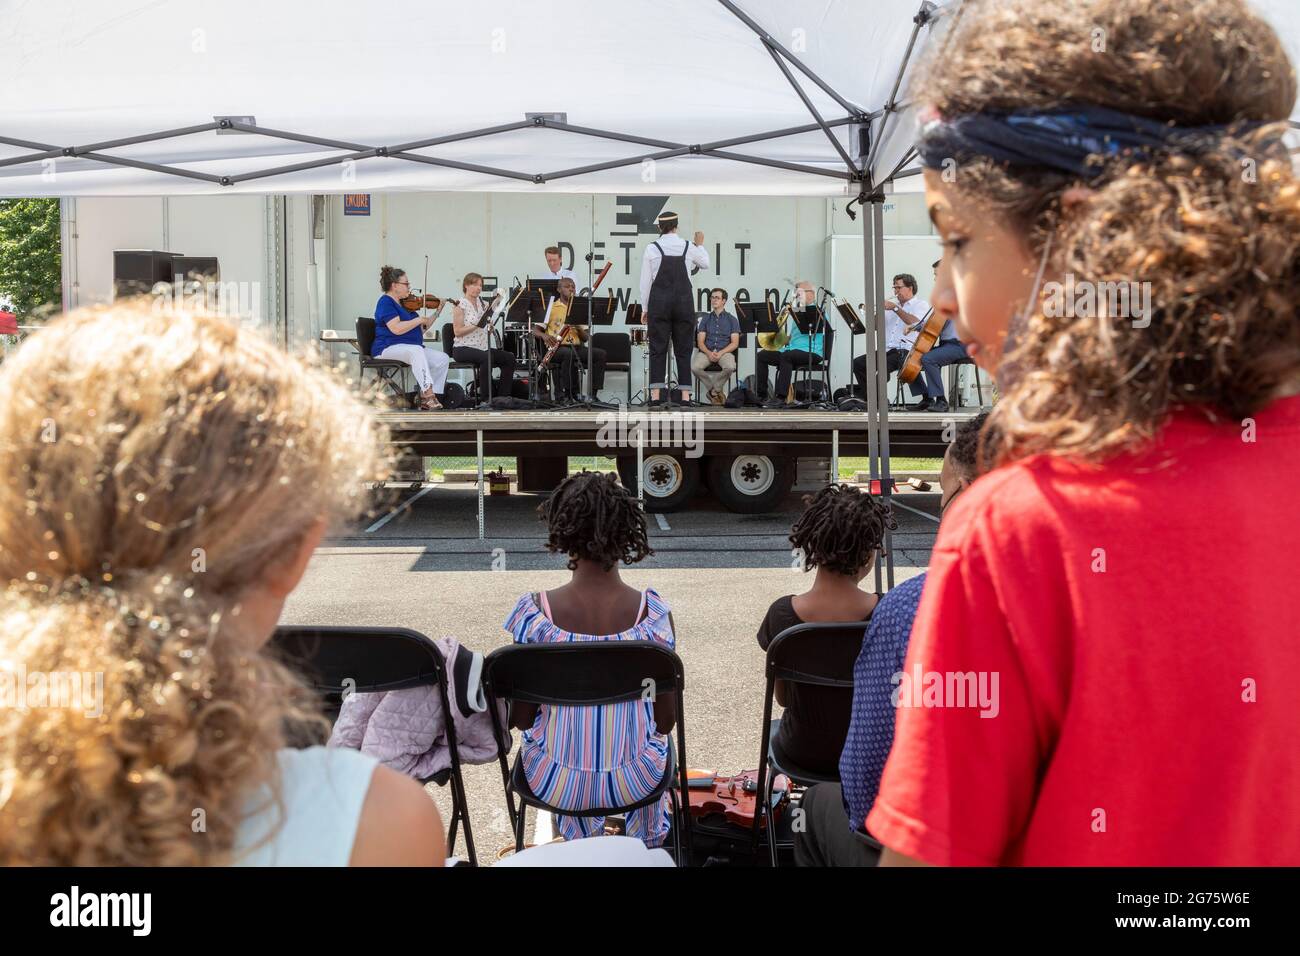 Detroit, Michigan - Members of the Detroit Symphony Orchestra play at a community arts and music festival. Stock Photo